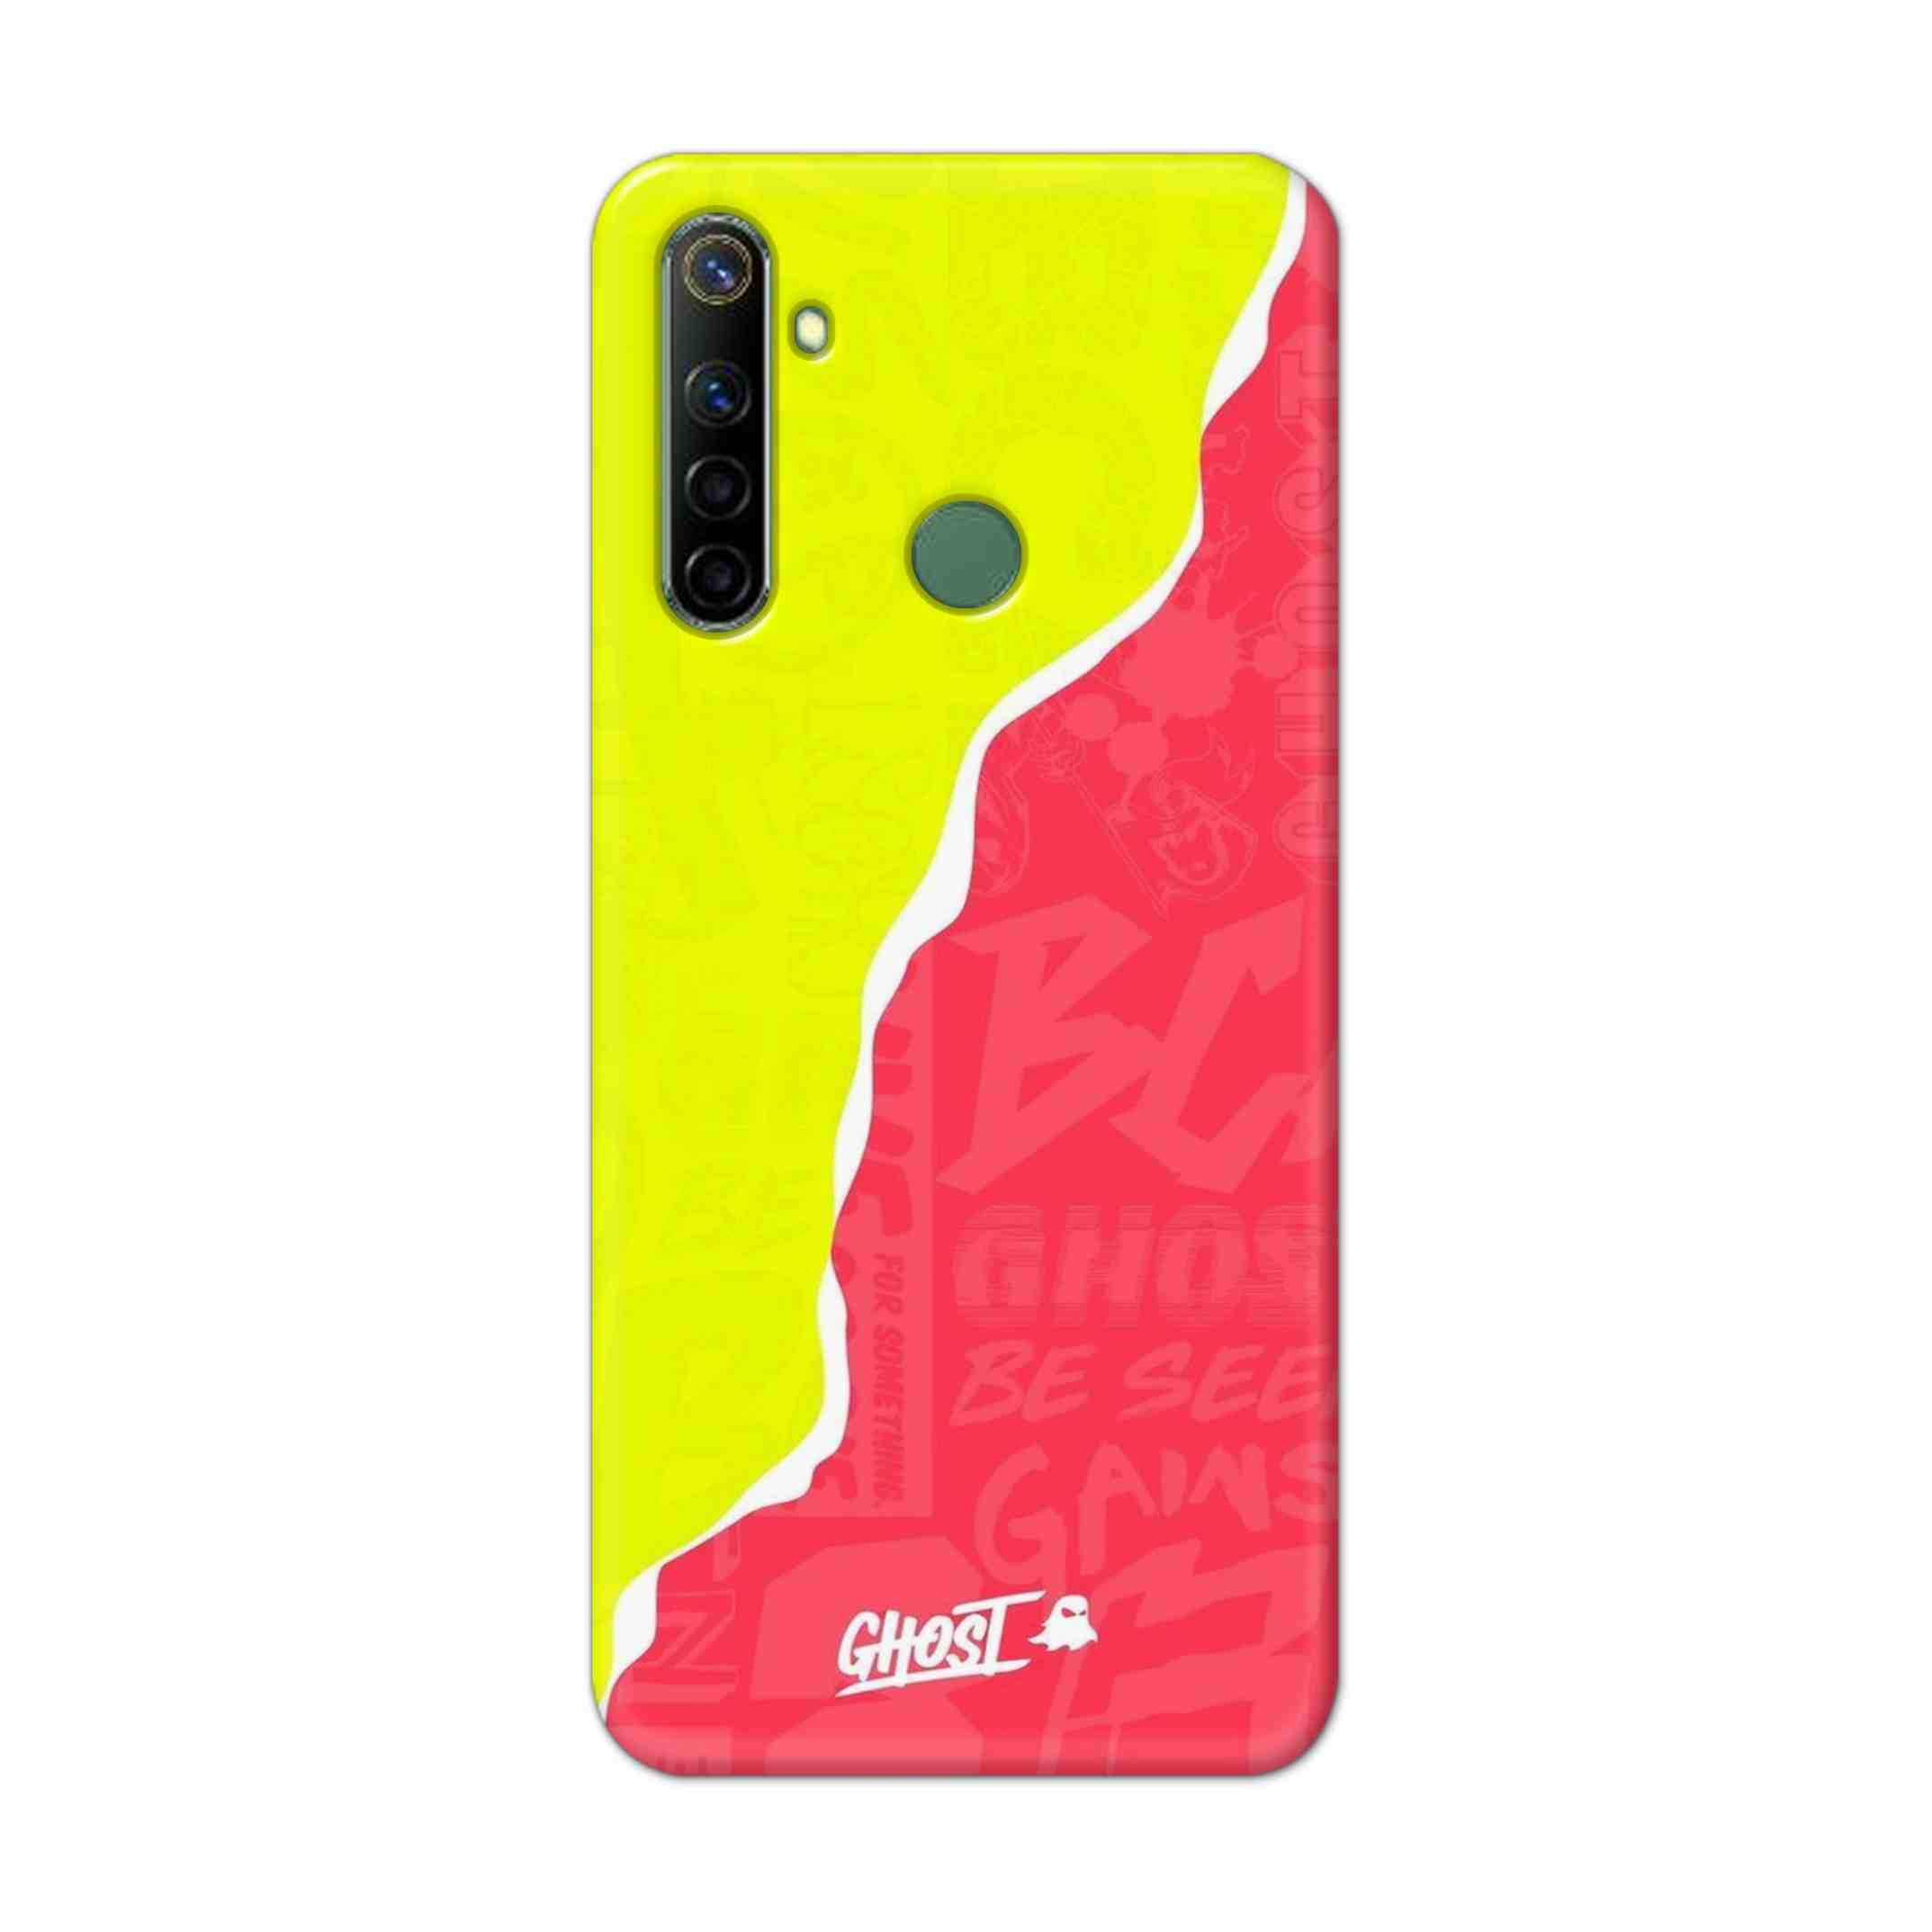 Buy Ghost Hard Back Mobile Phone Case Cover For Realme Narzo 10a Online